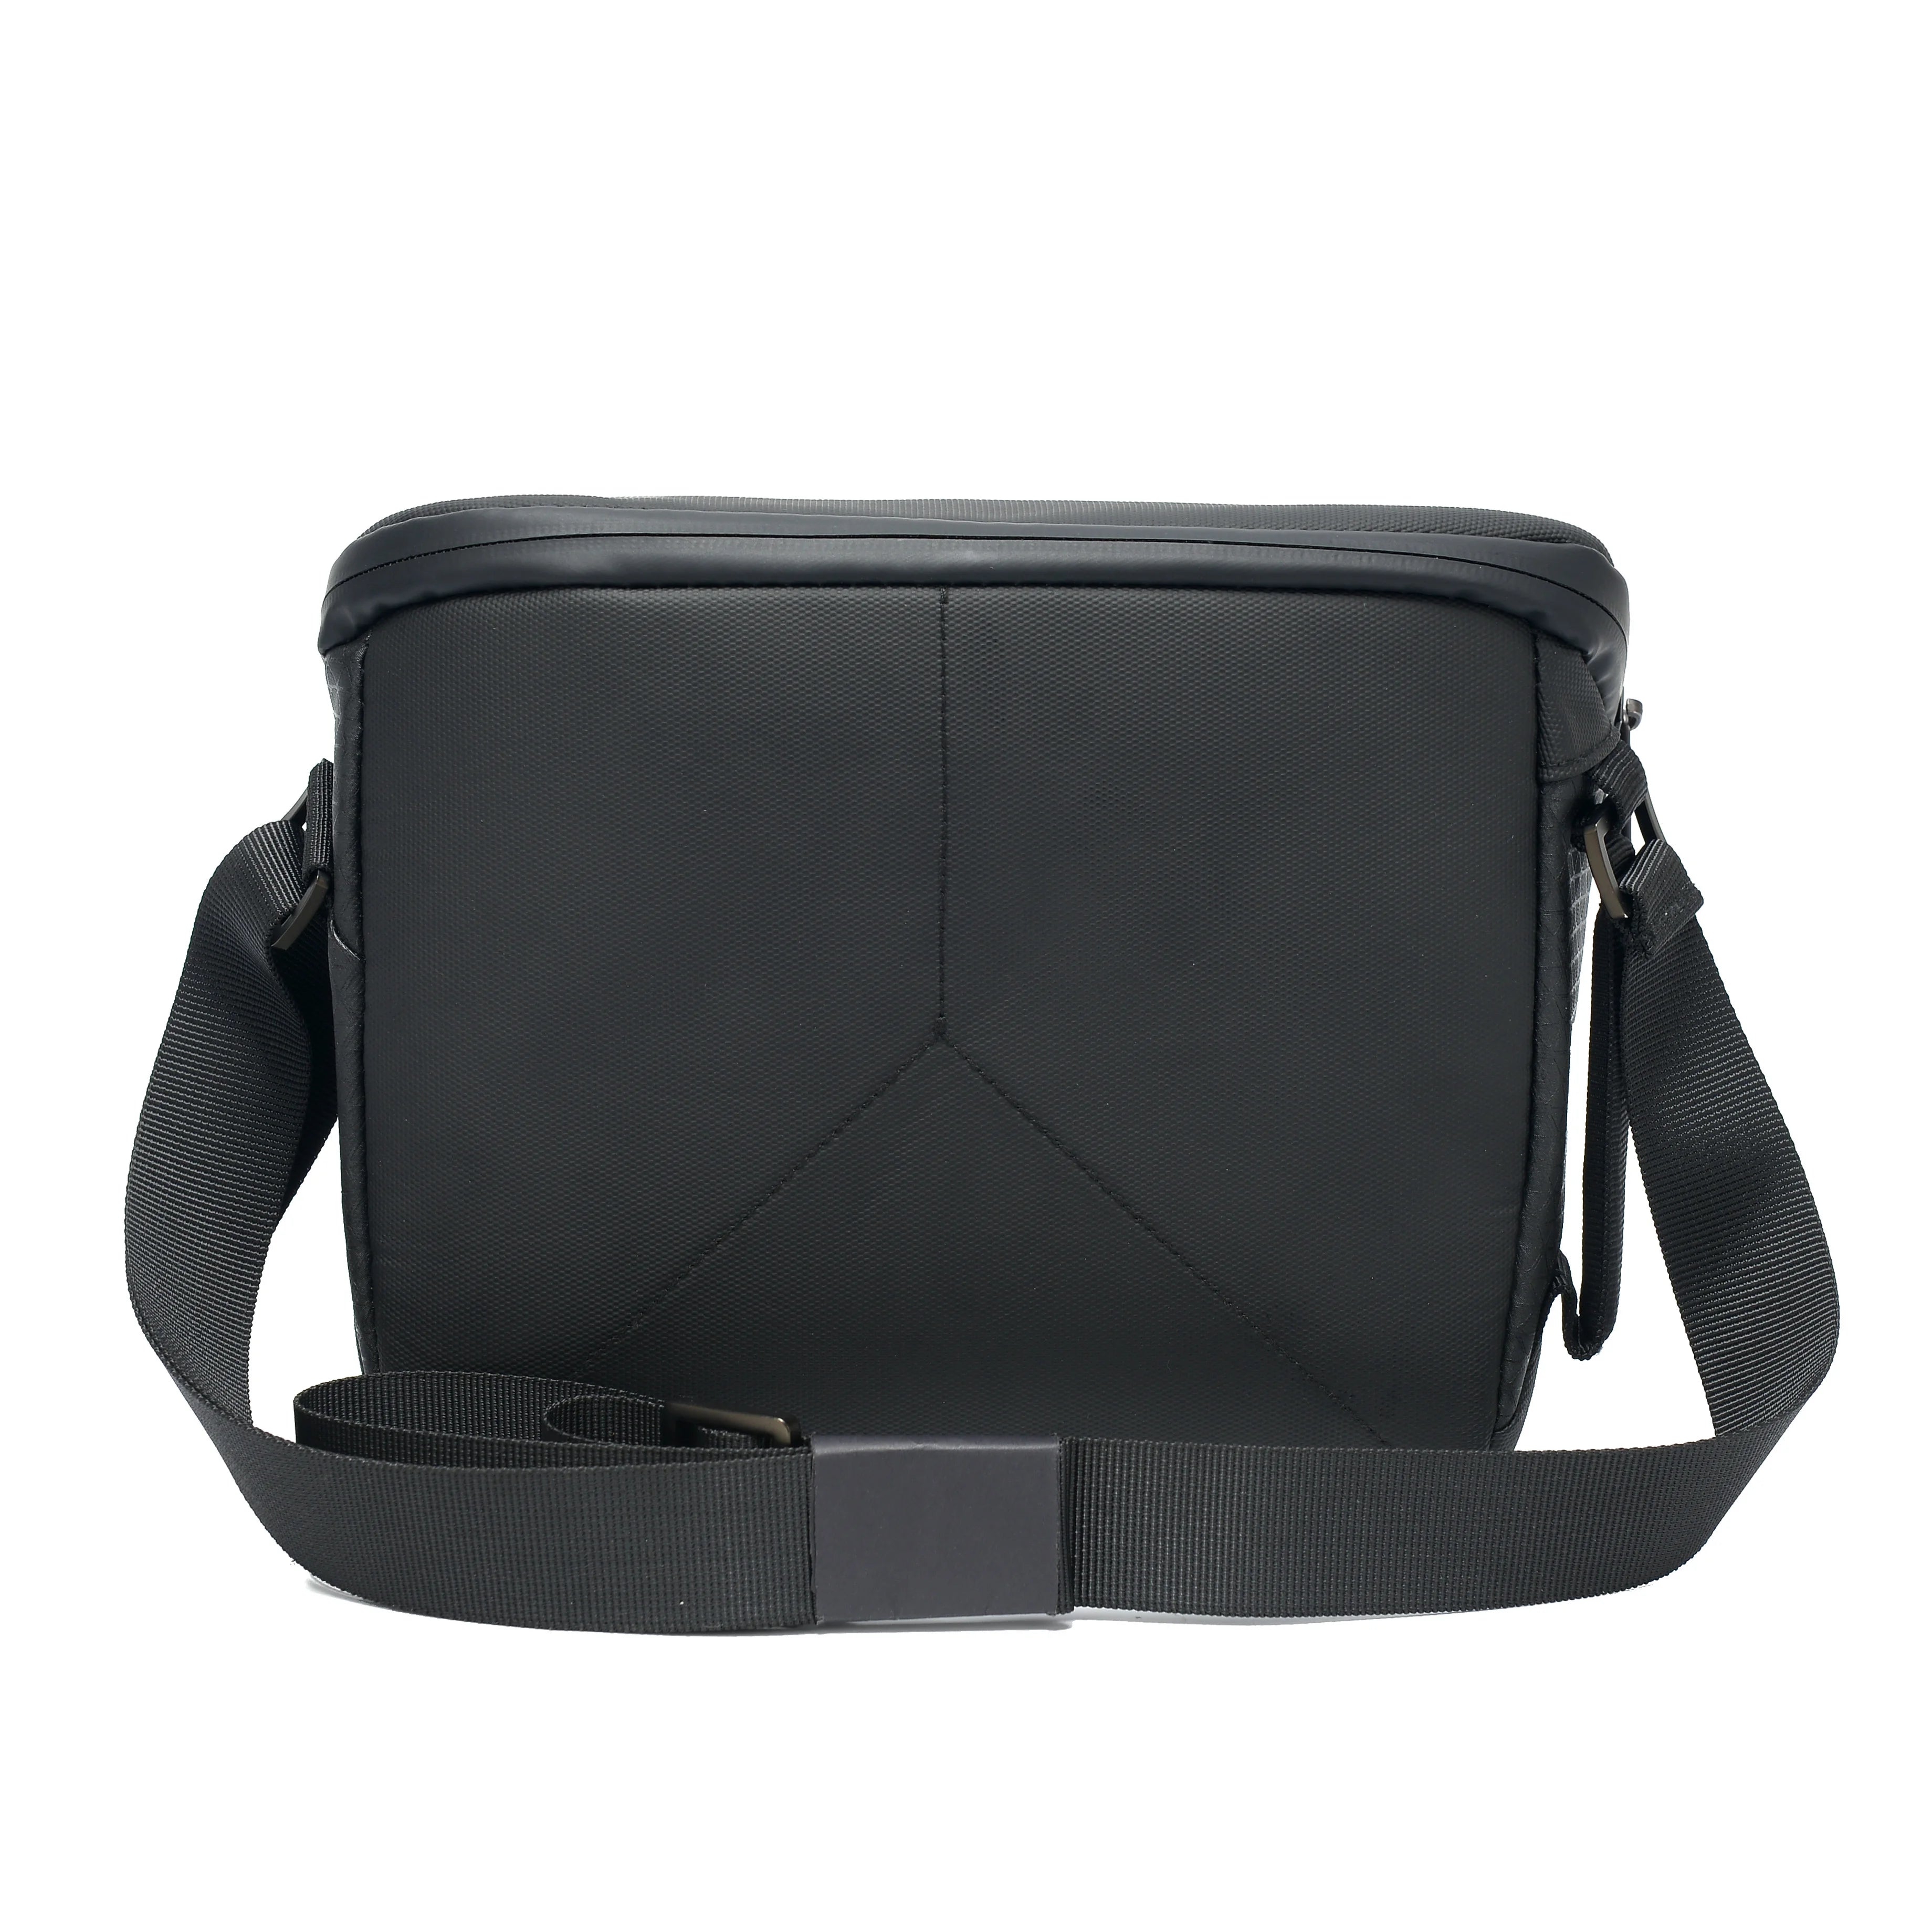 for DJI Mini 4 Pro Shoulder Bag Storage, It can be organized neatly and it is compact and comfortable to carry